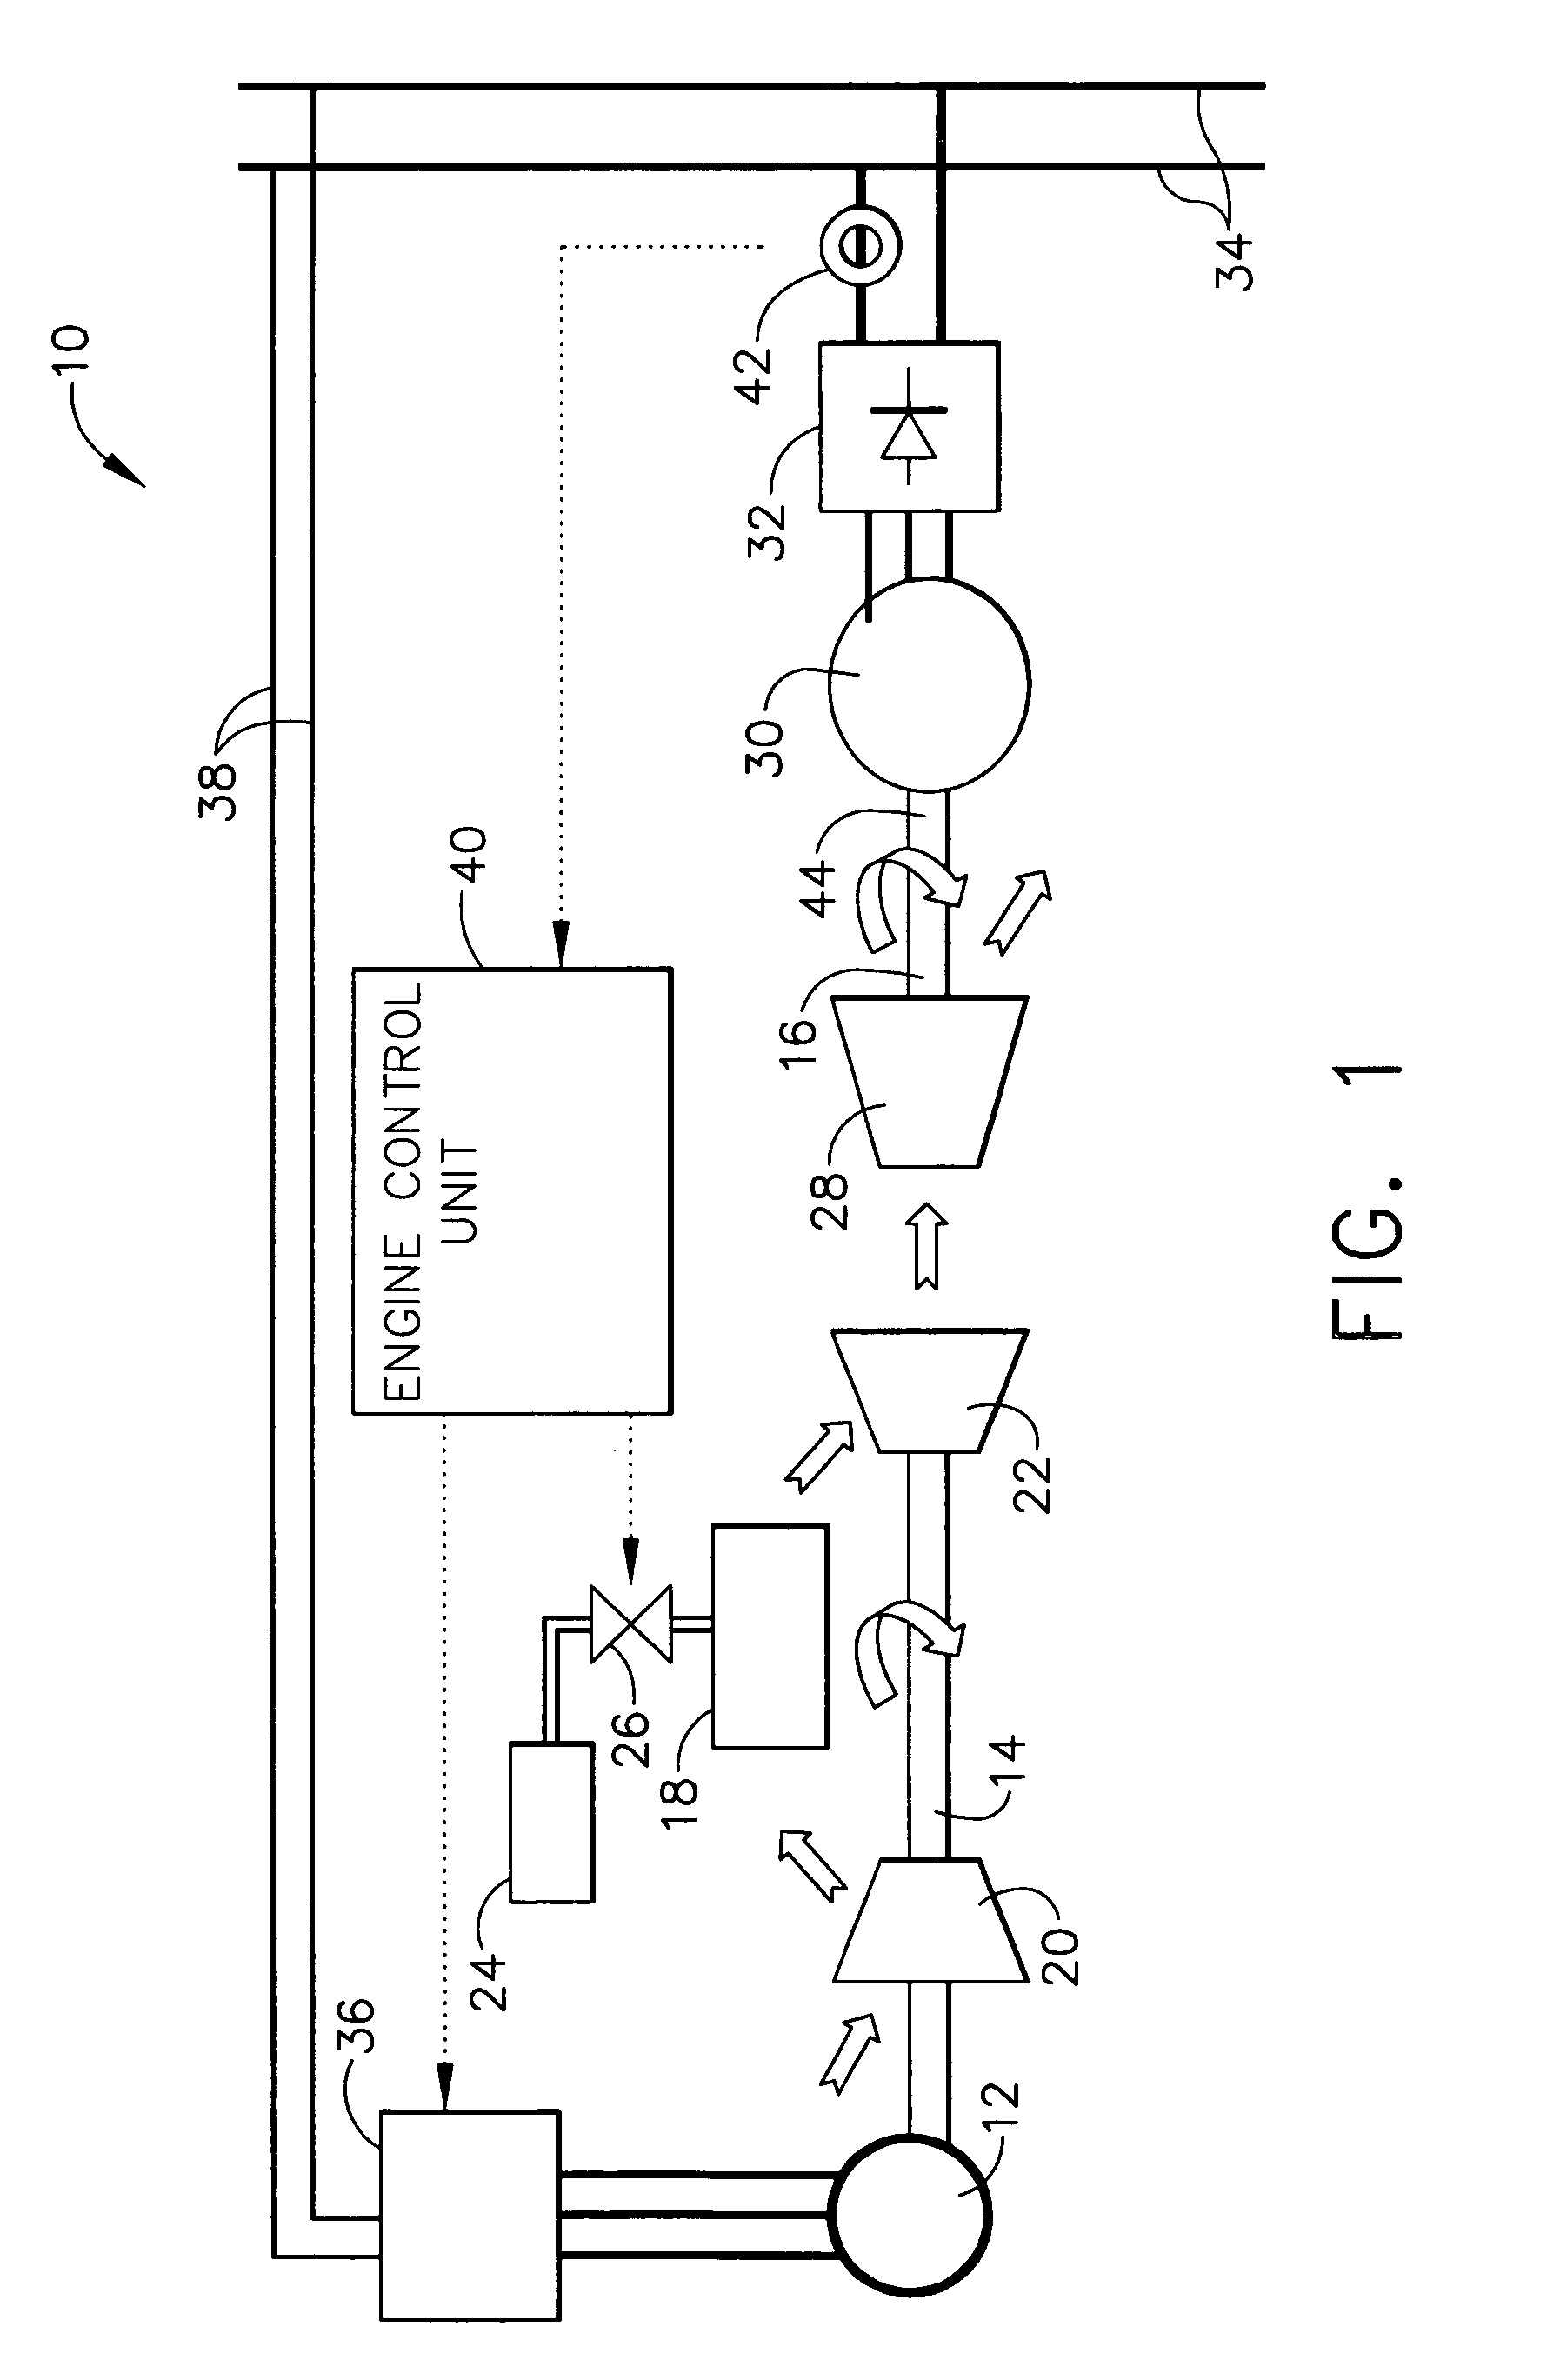 Starting and controlling speed of a two spool gas turbine engine